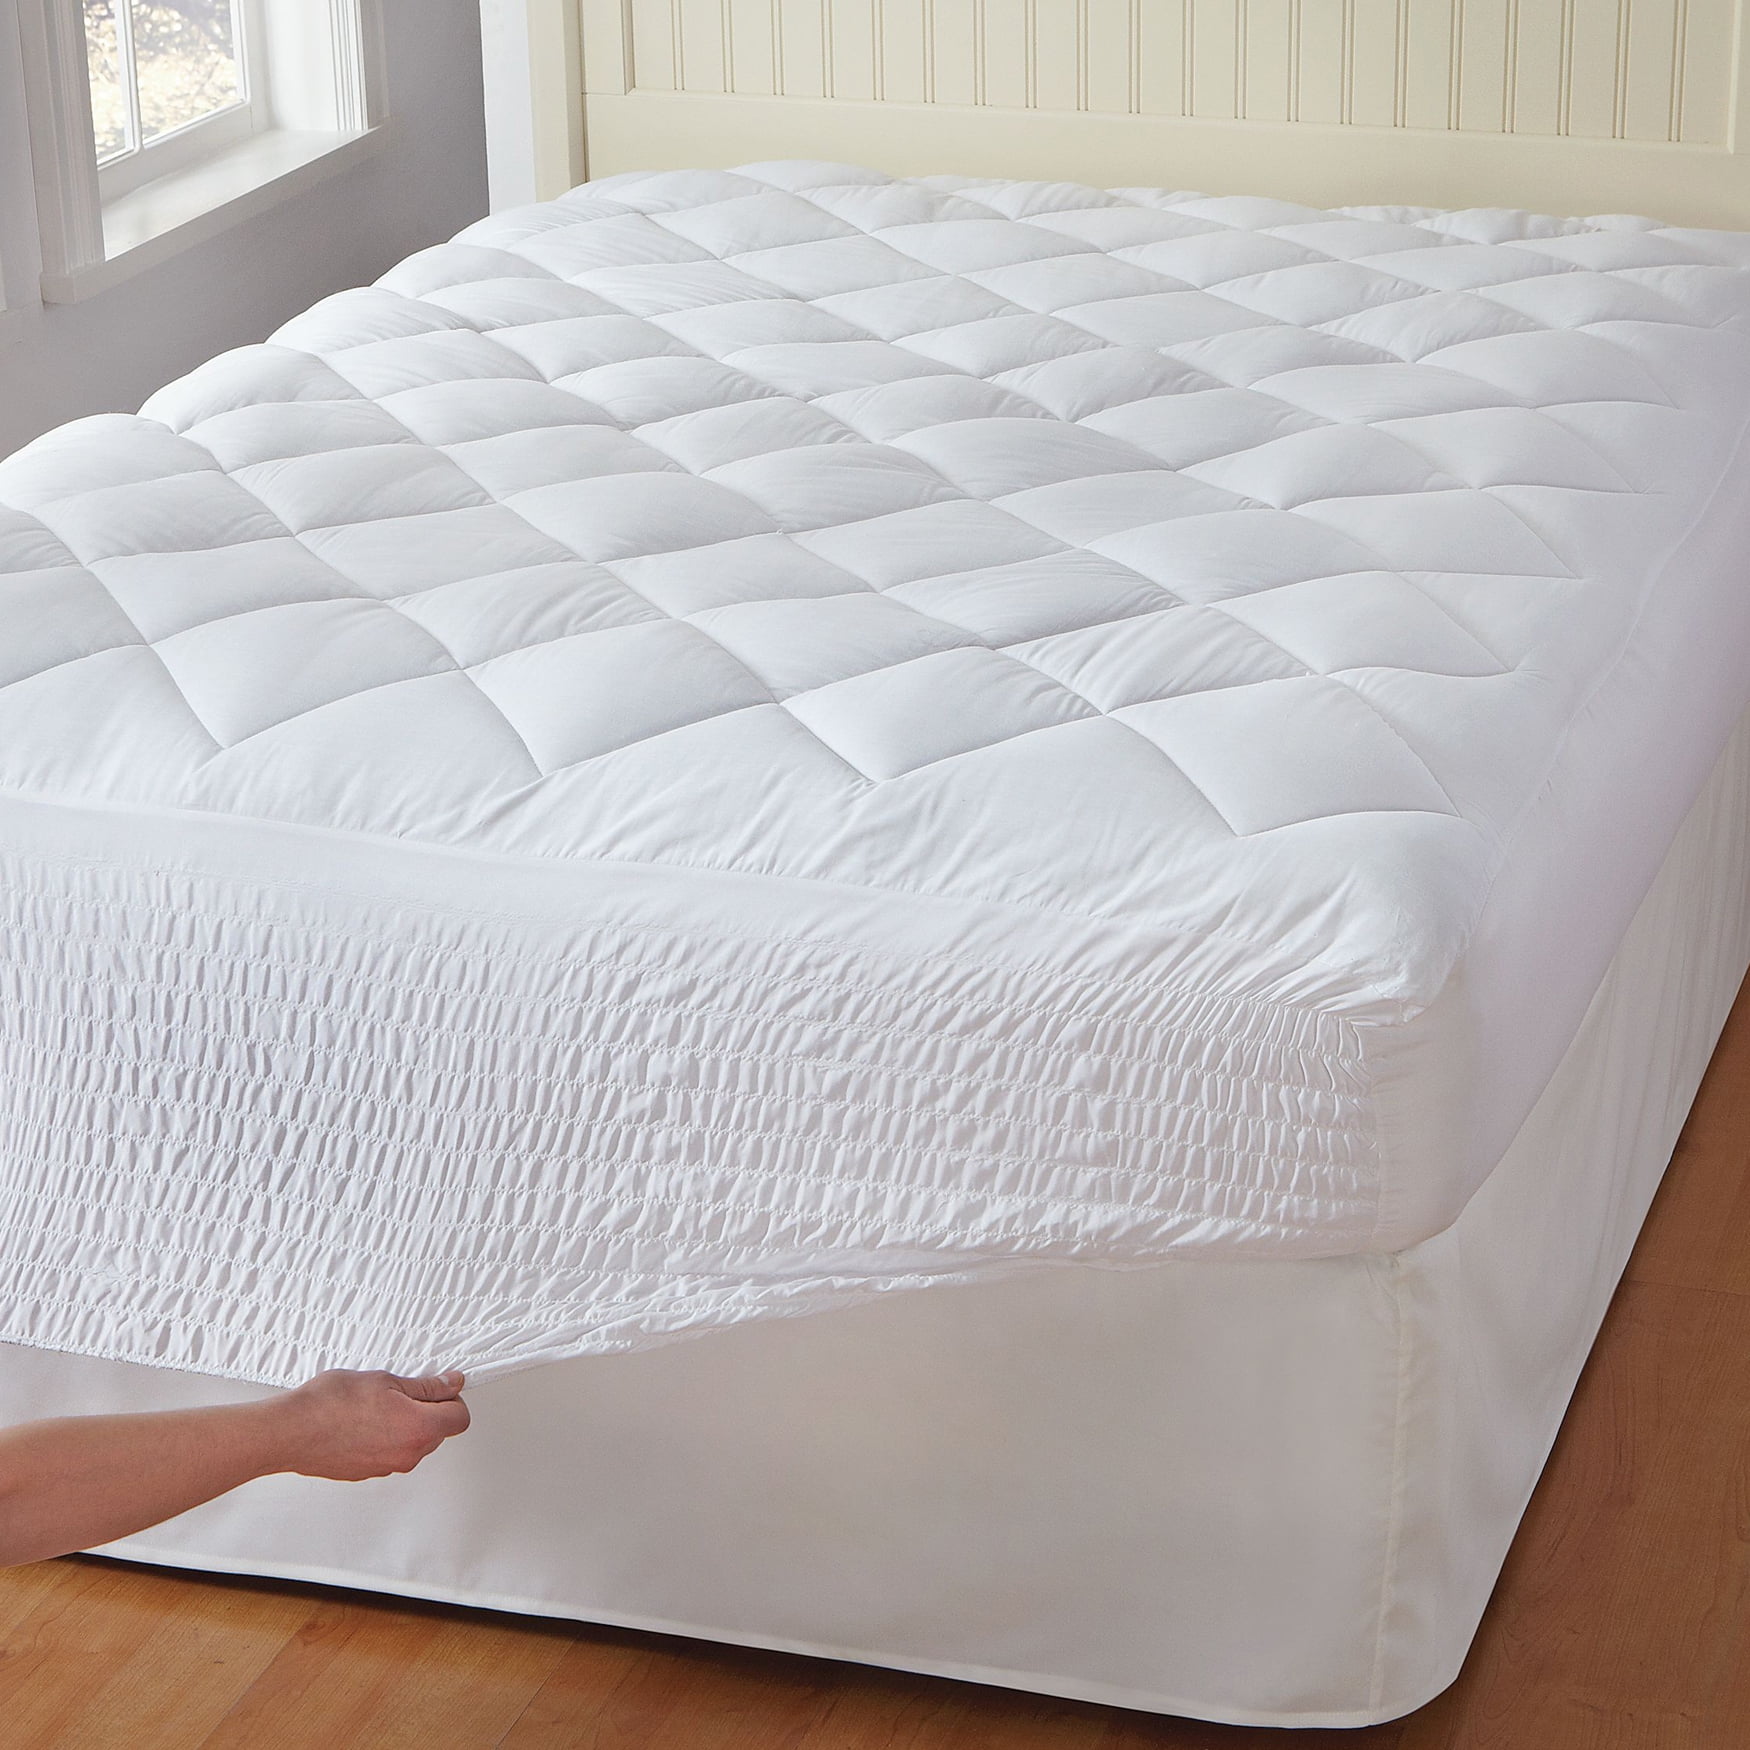 Overfilled Topper Super Soft Cover Mellanni Microplush Mattress Pad Protector 